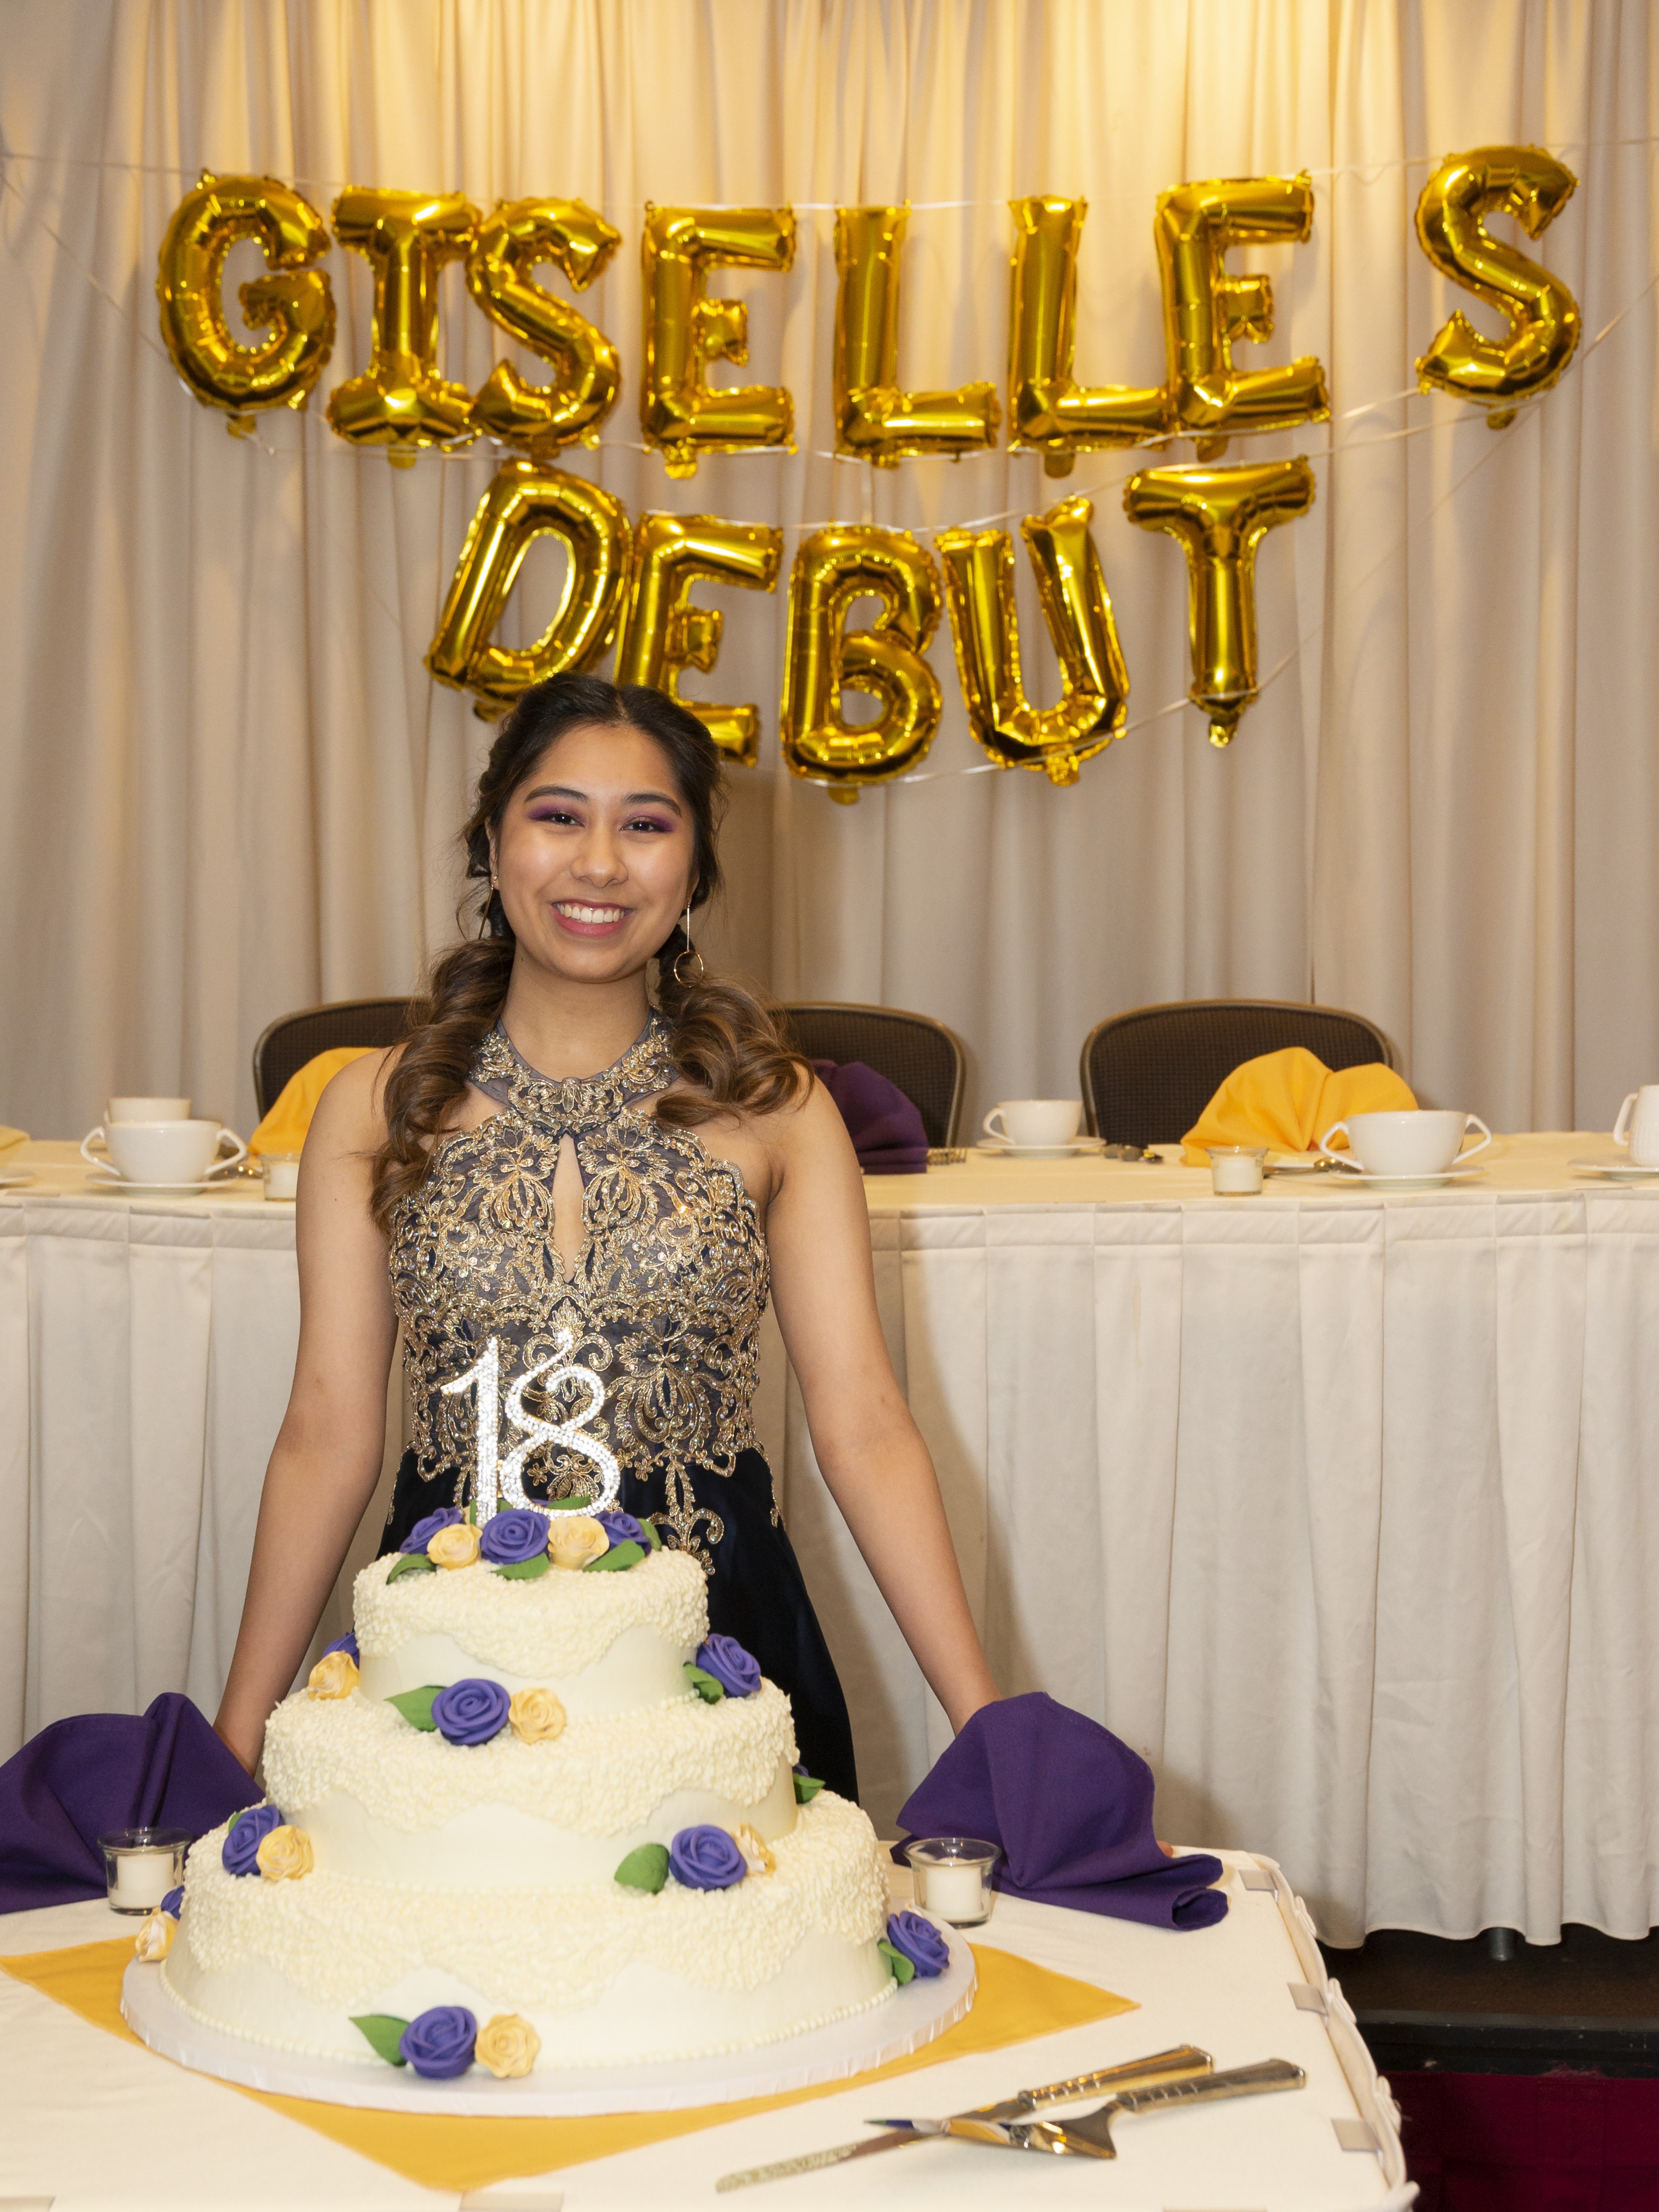 Giselle posing with their 18th birthday cake